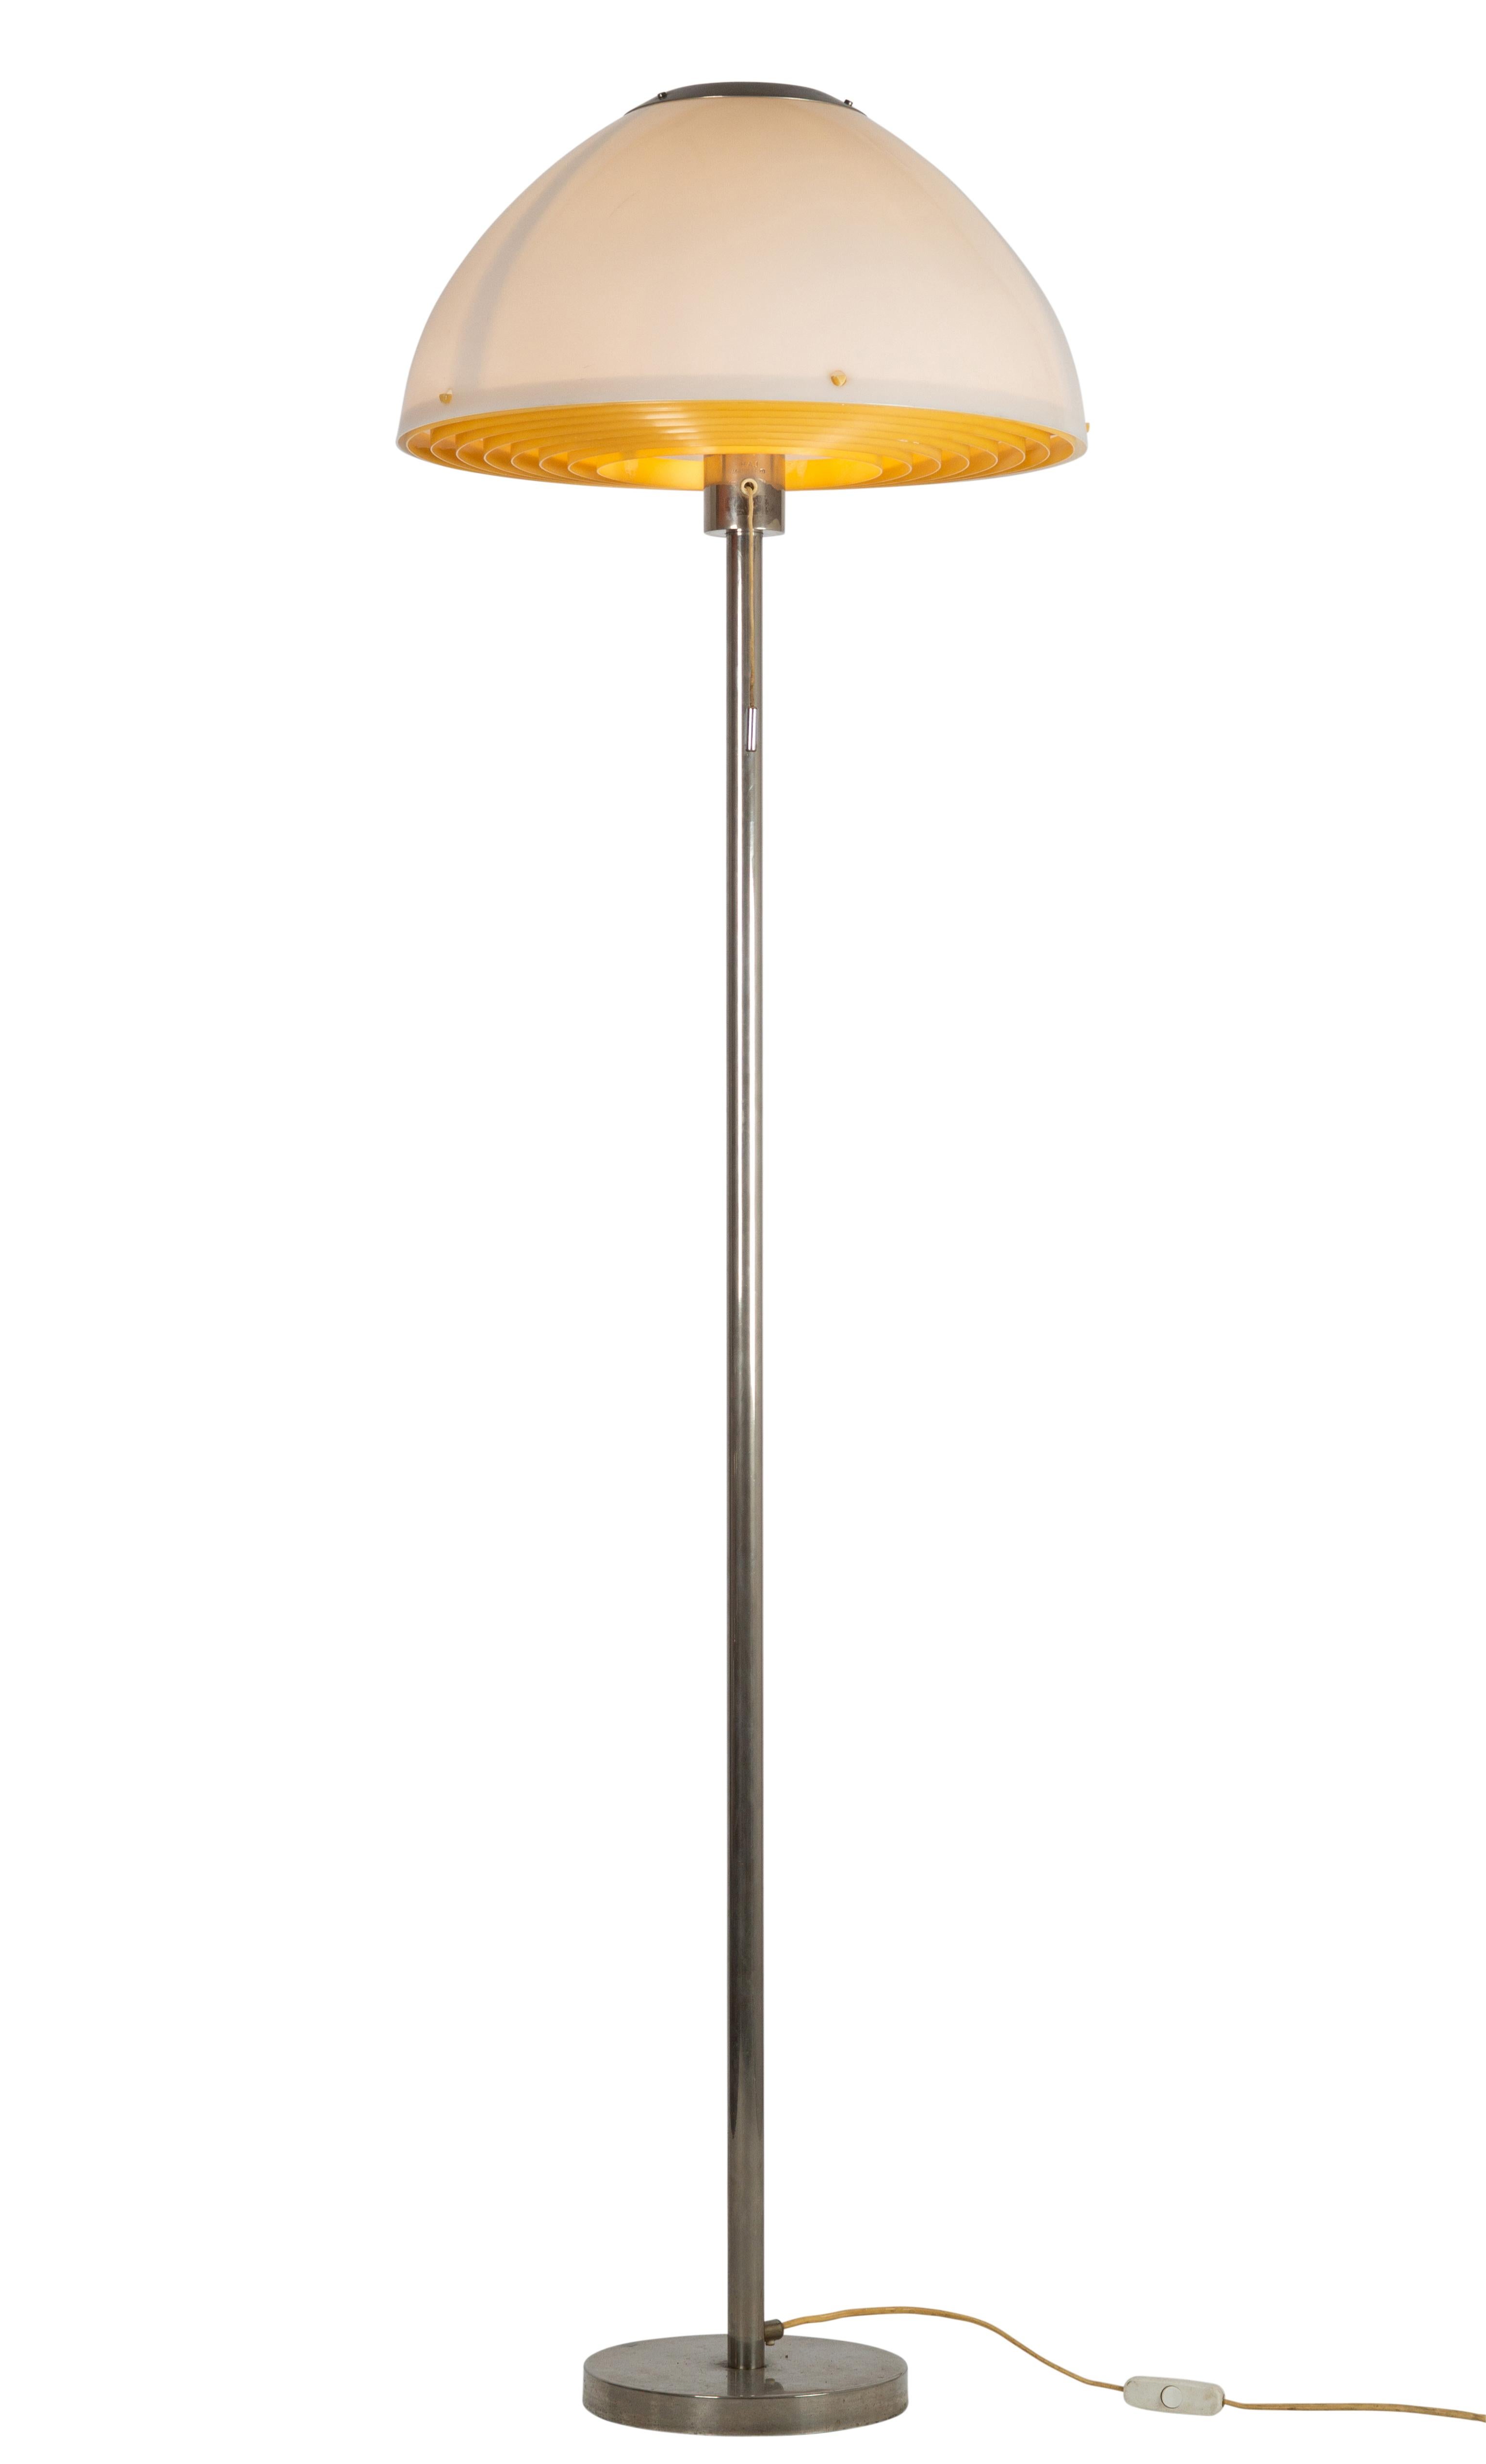 Hans-Agne Jakobsson Rare floor lamp, very hard to find. Metal base with a acrylic shade. There is a circular grid in front of the light, this gives a beautiful and warm light. The lamp has a makers stamp on the top of the fixture.

 